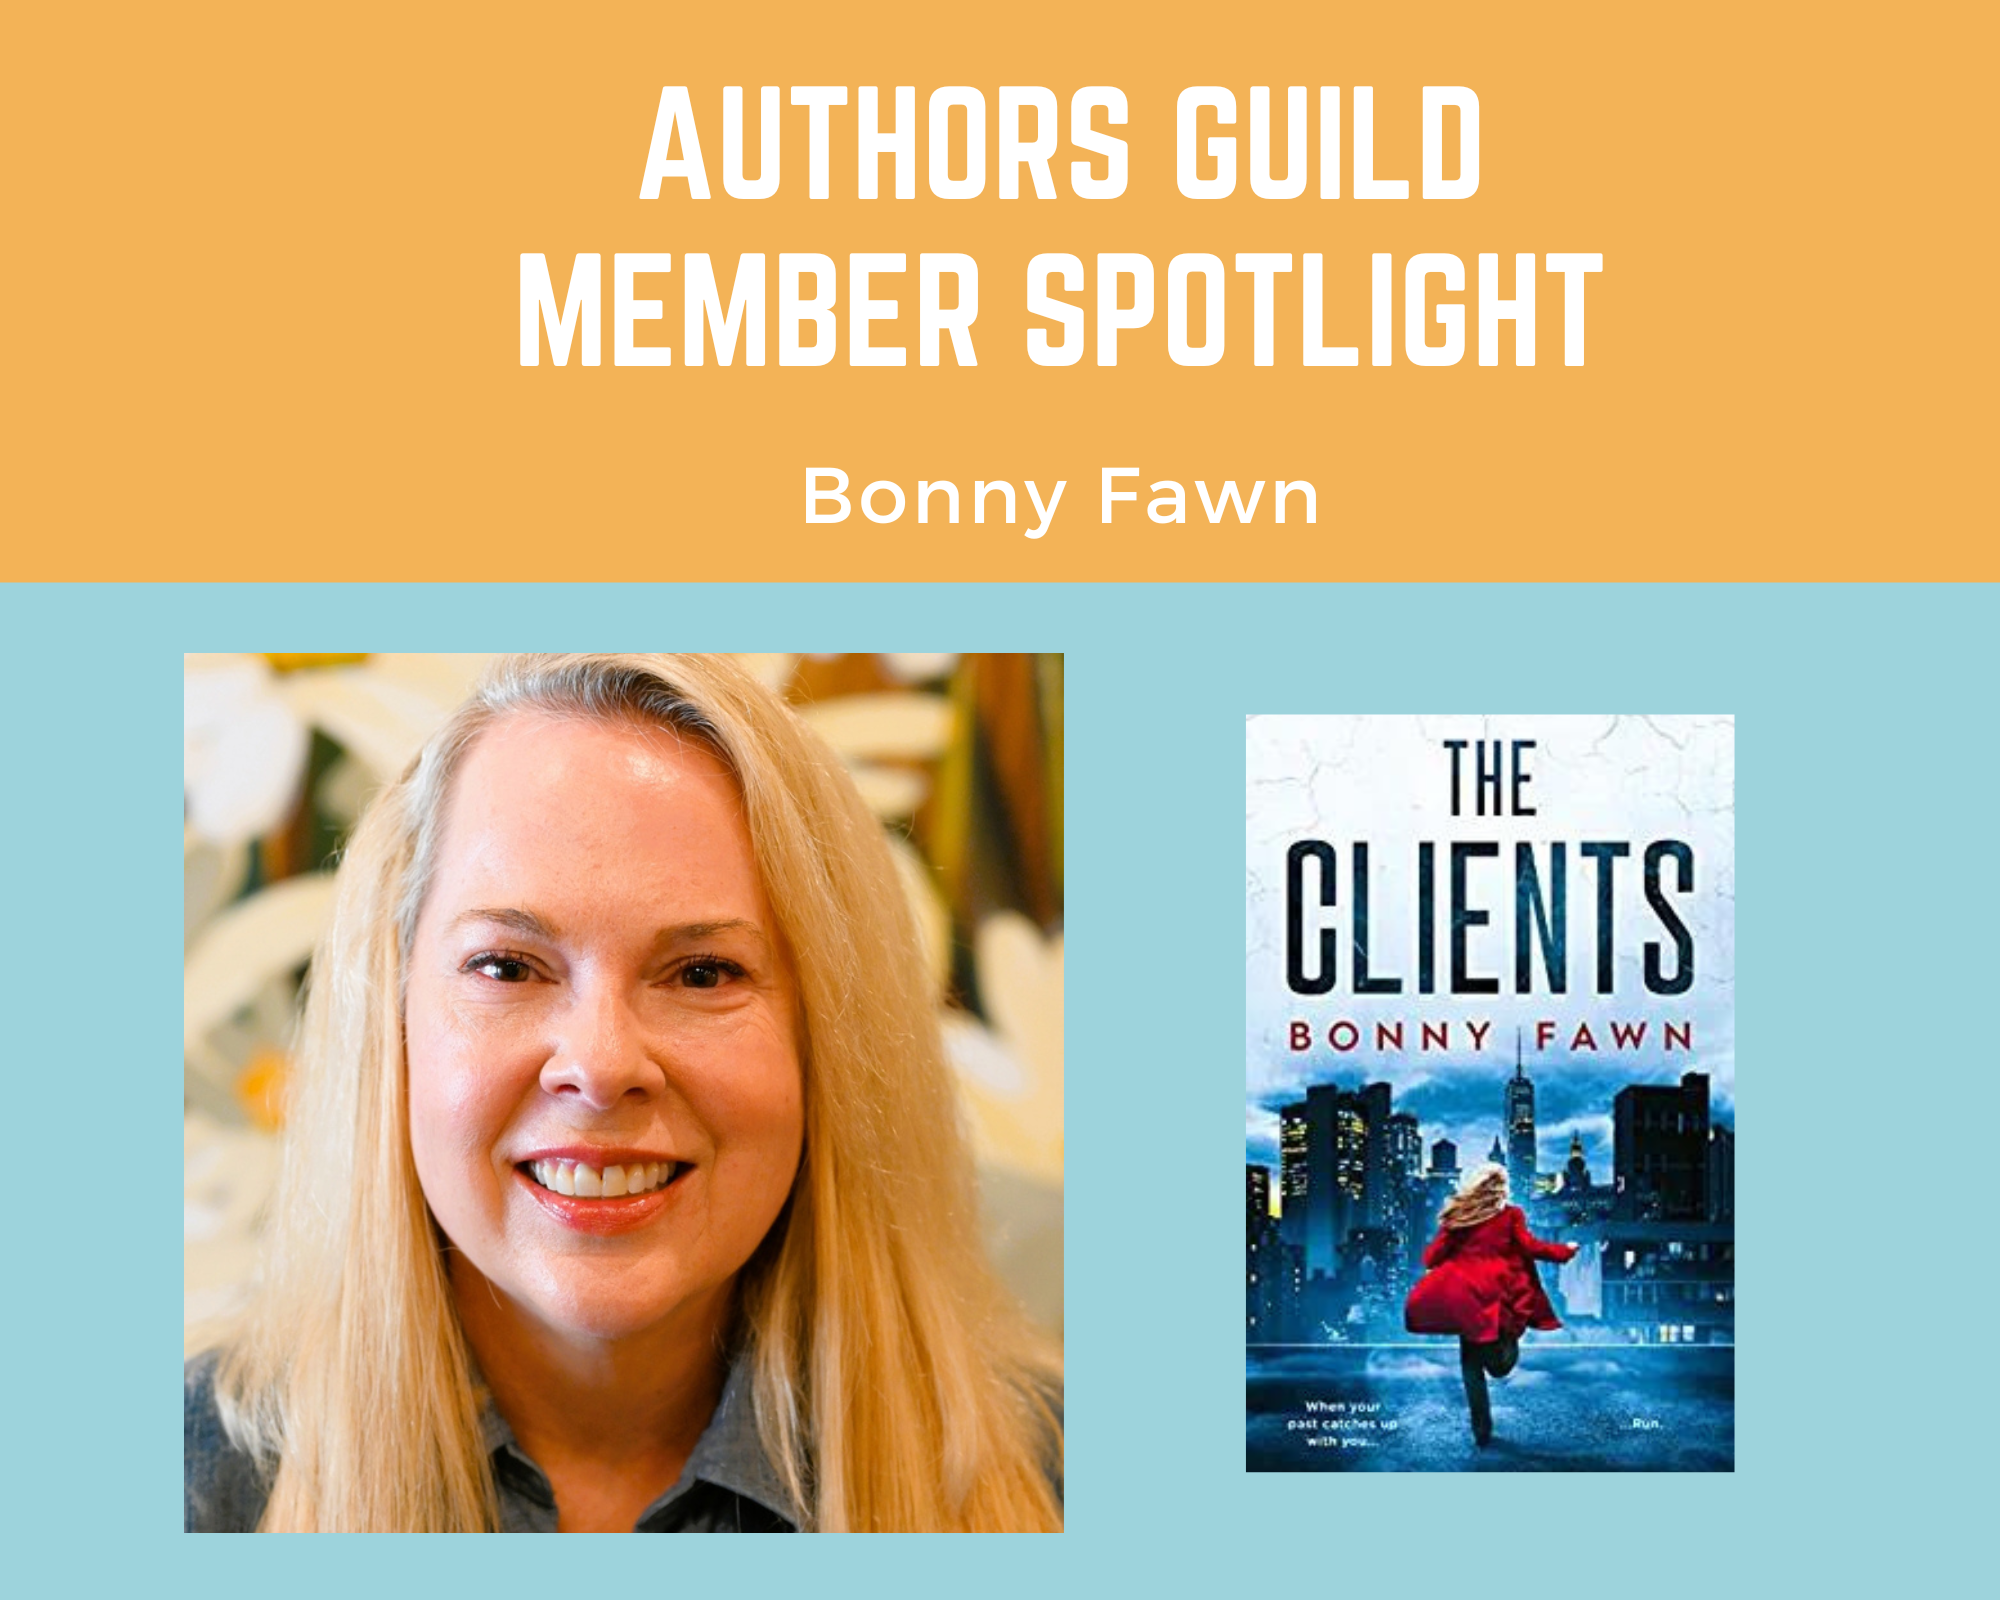 author Bonny Fawn smiling directly at camera and an image of her book The Clients